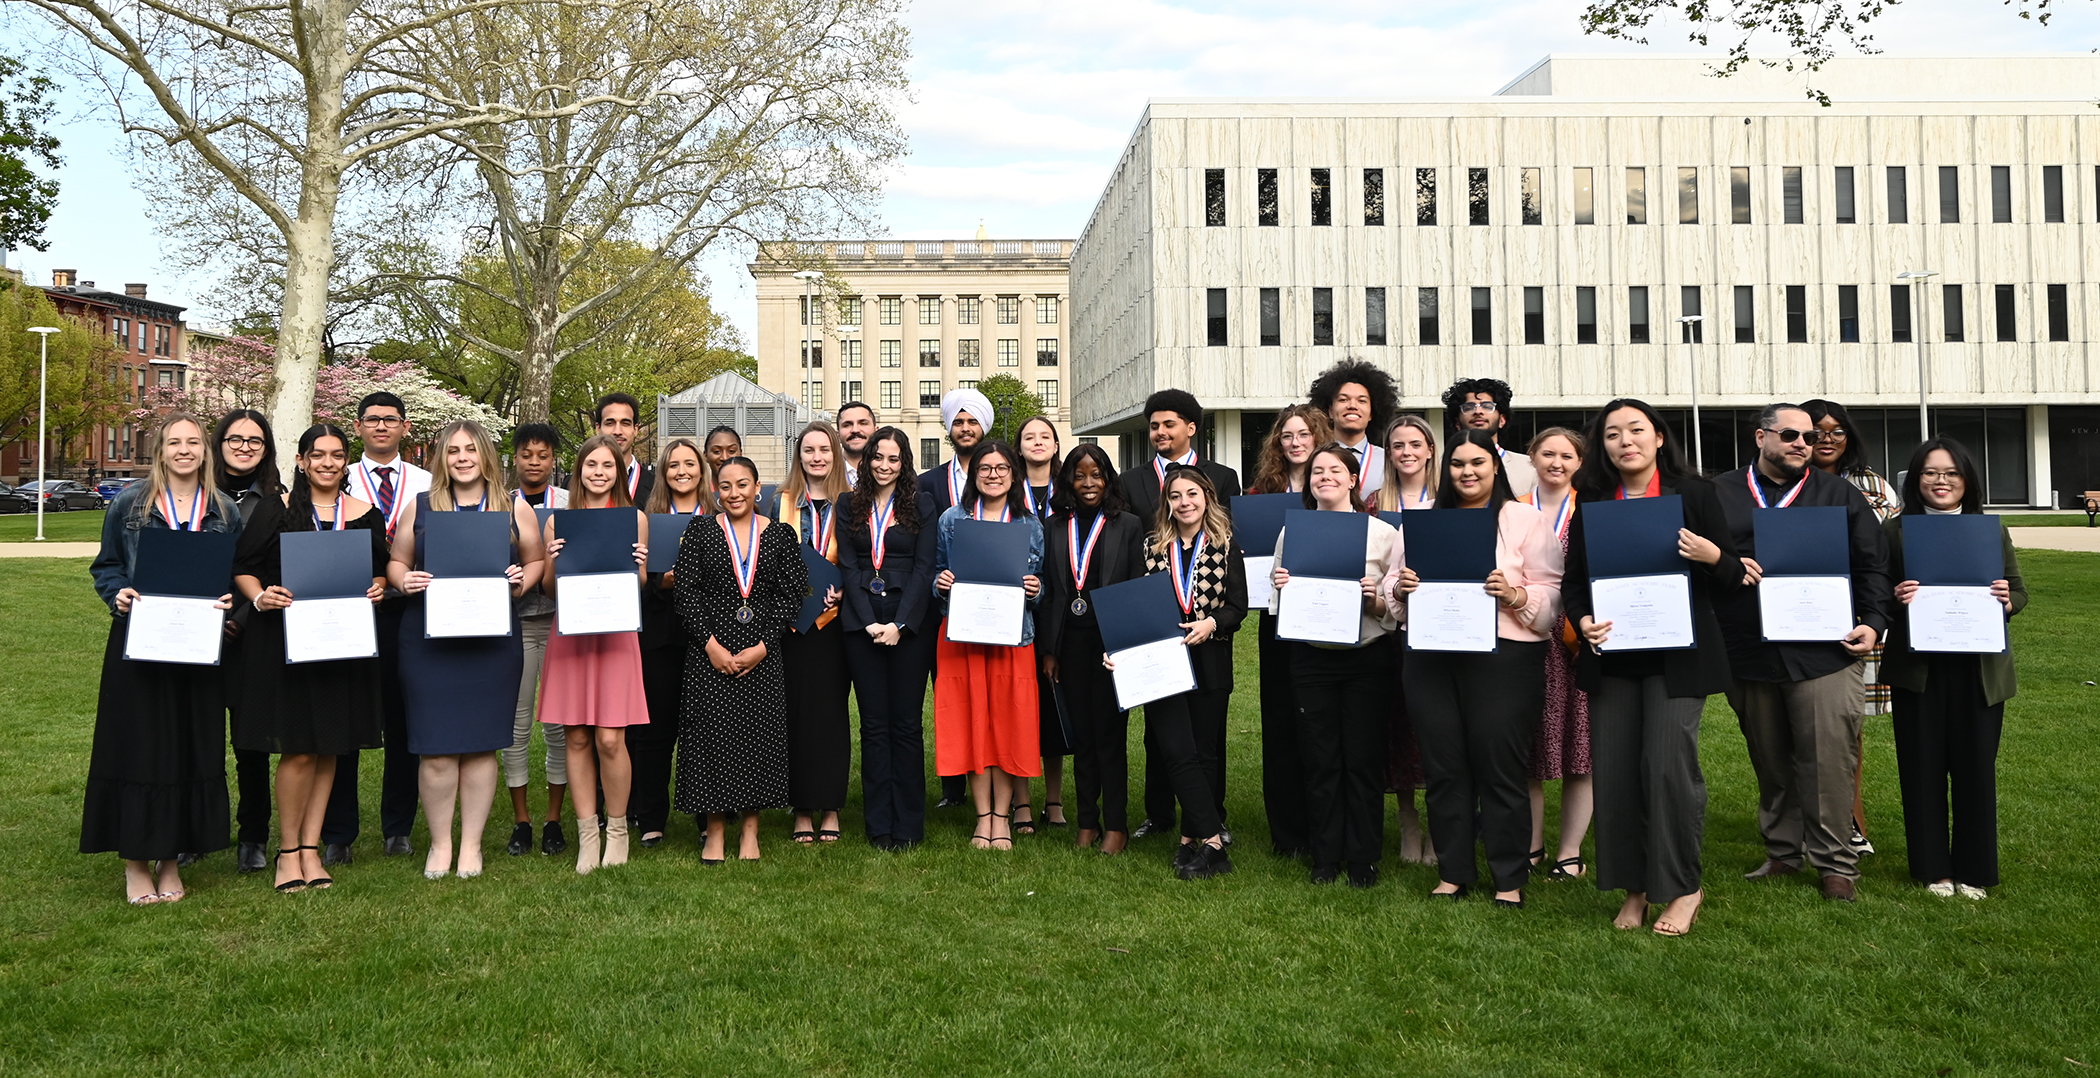 A group of 38 students gather for a picture holding awards.